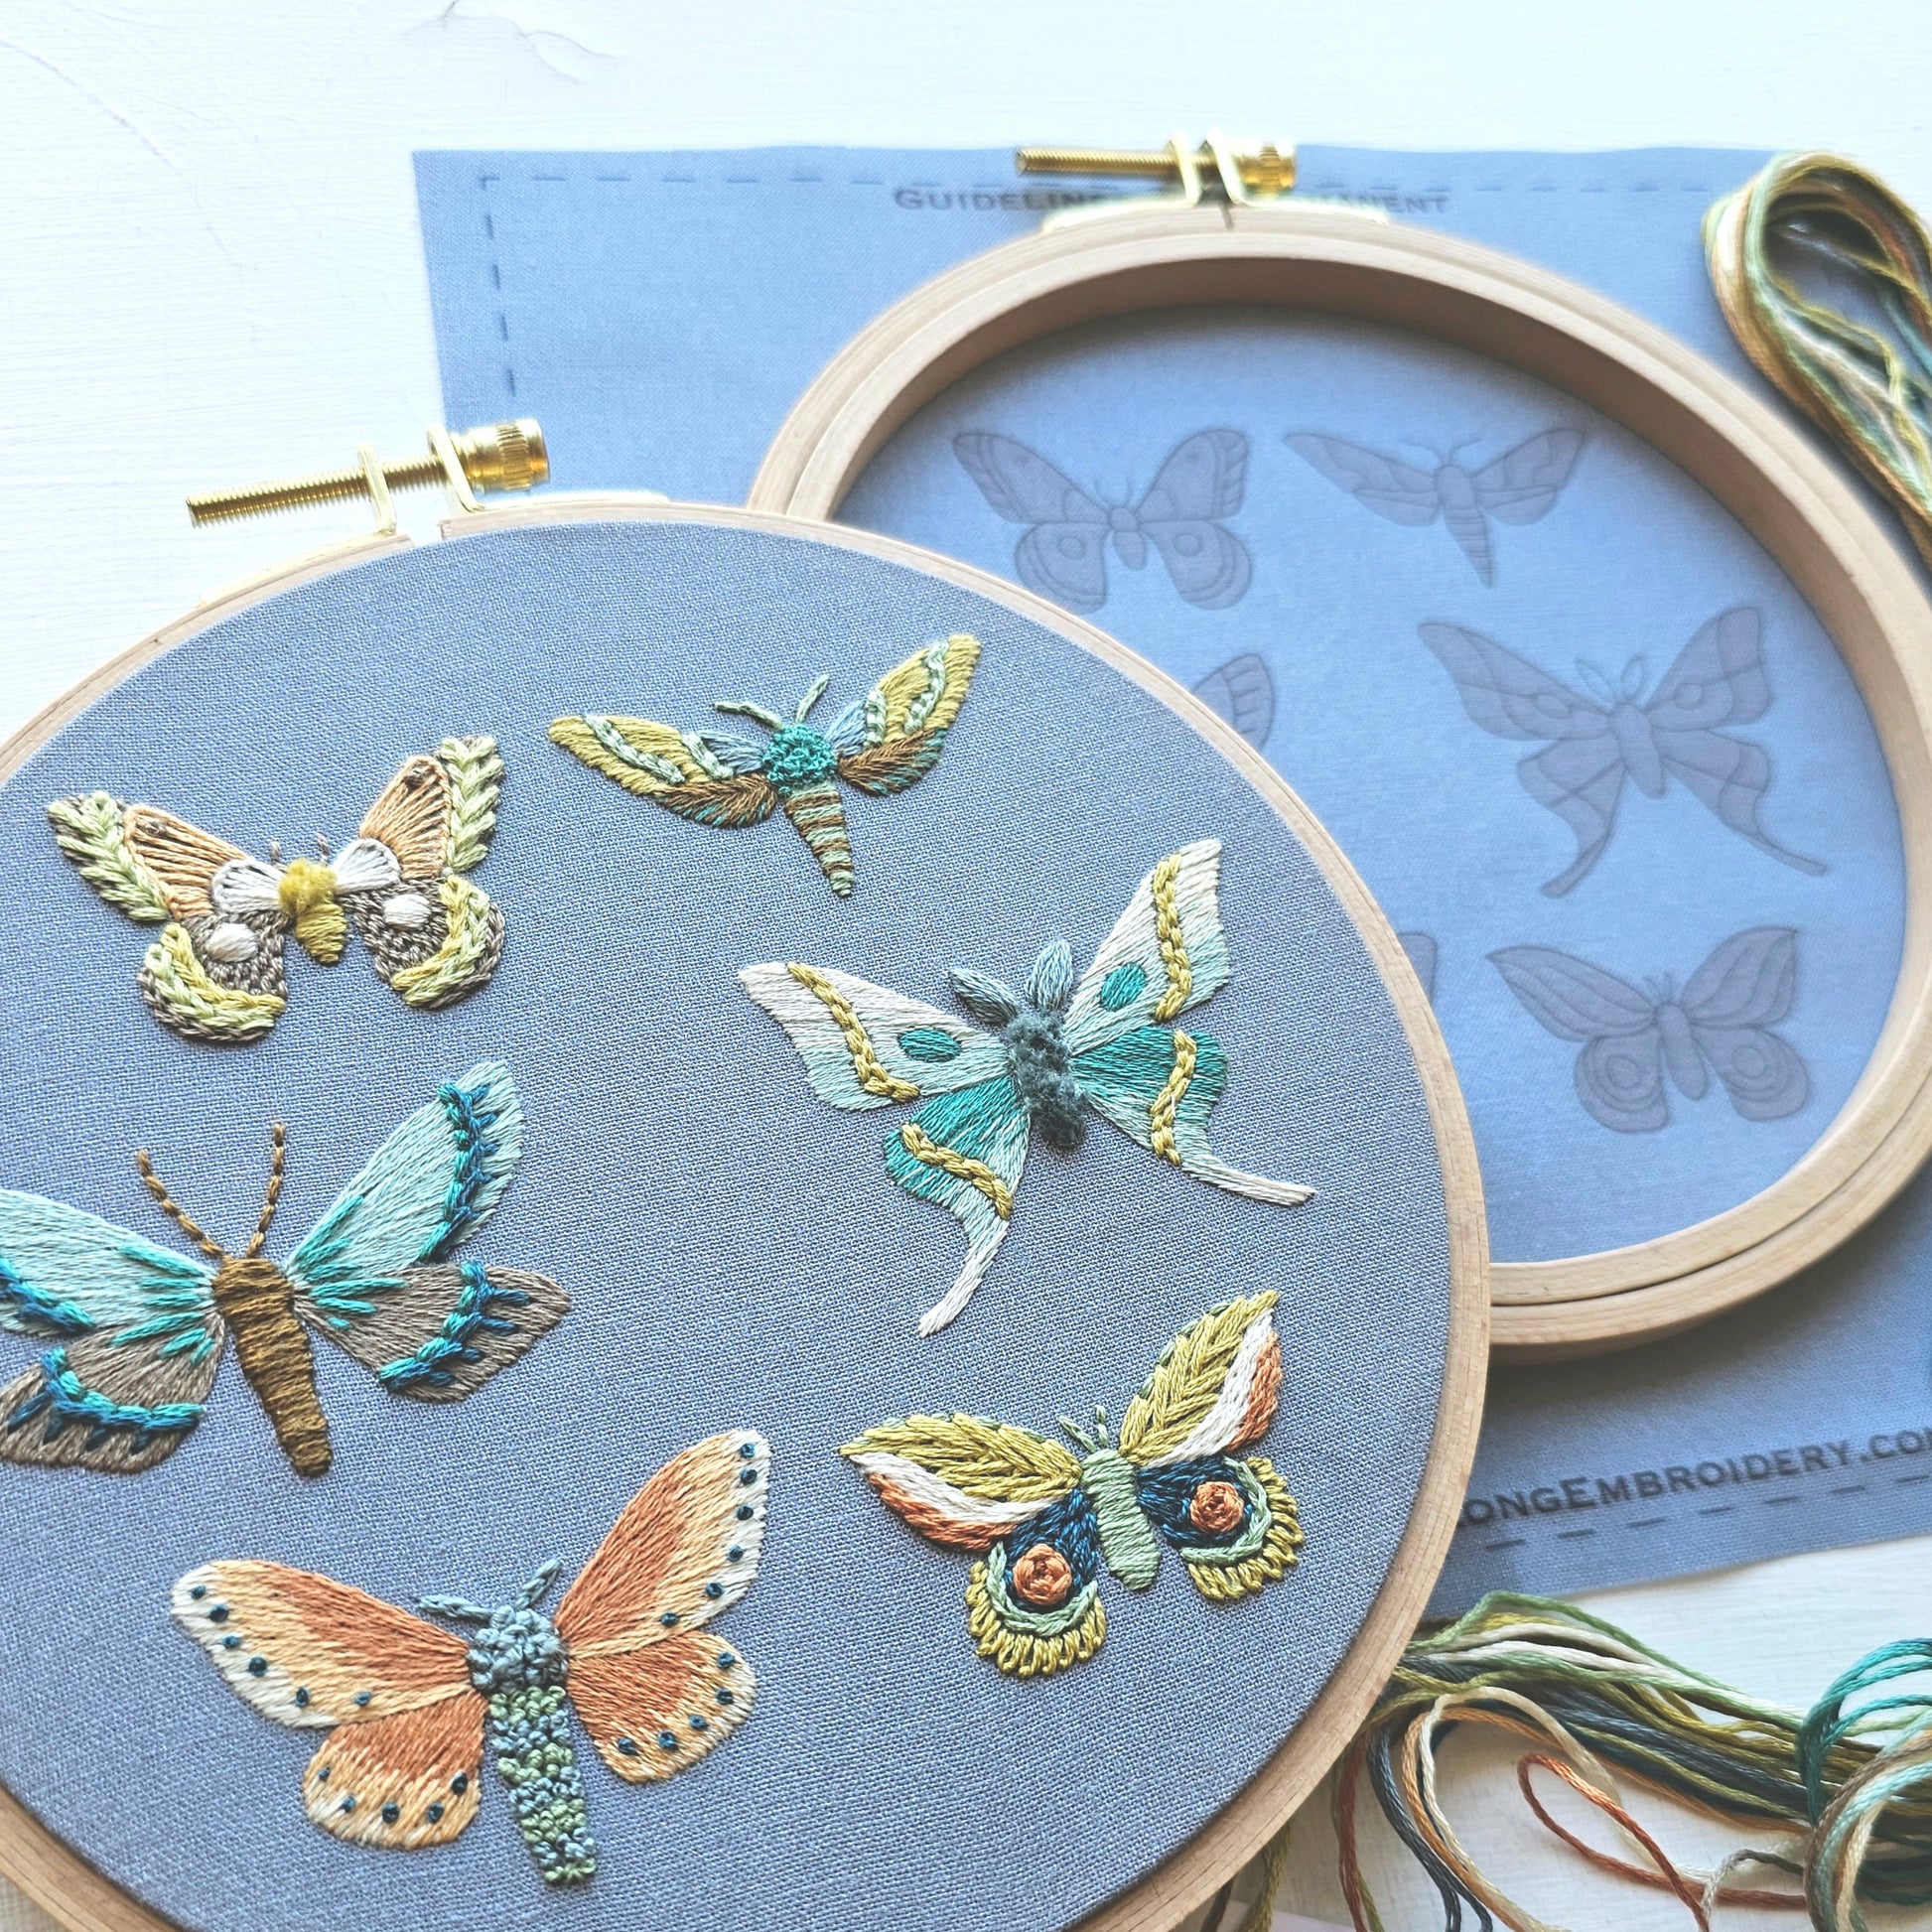 What Can You Design with Embroidery Stencils?